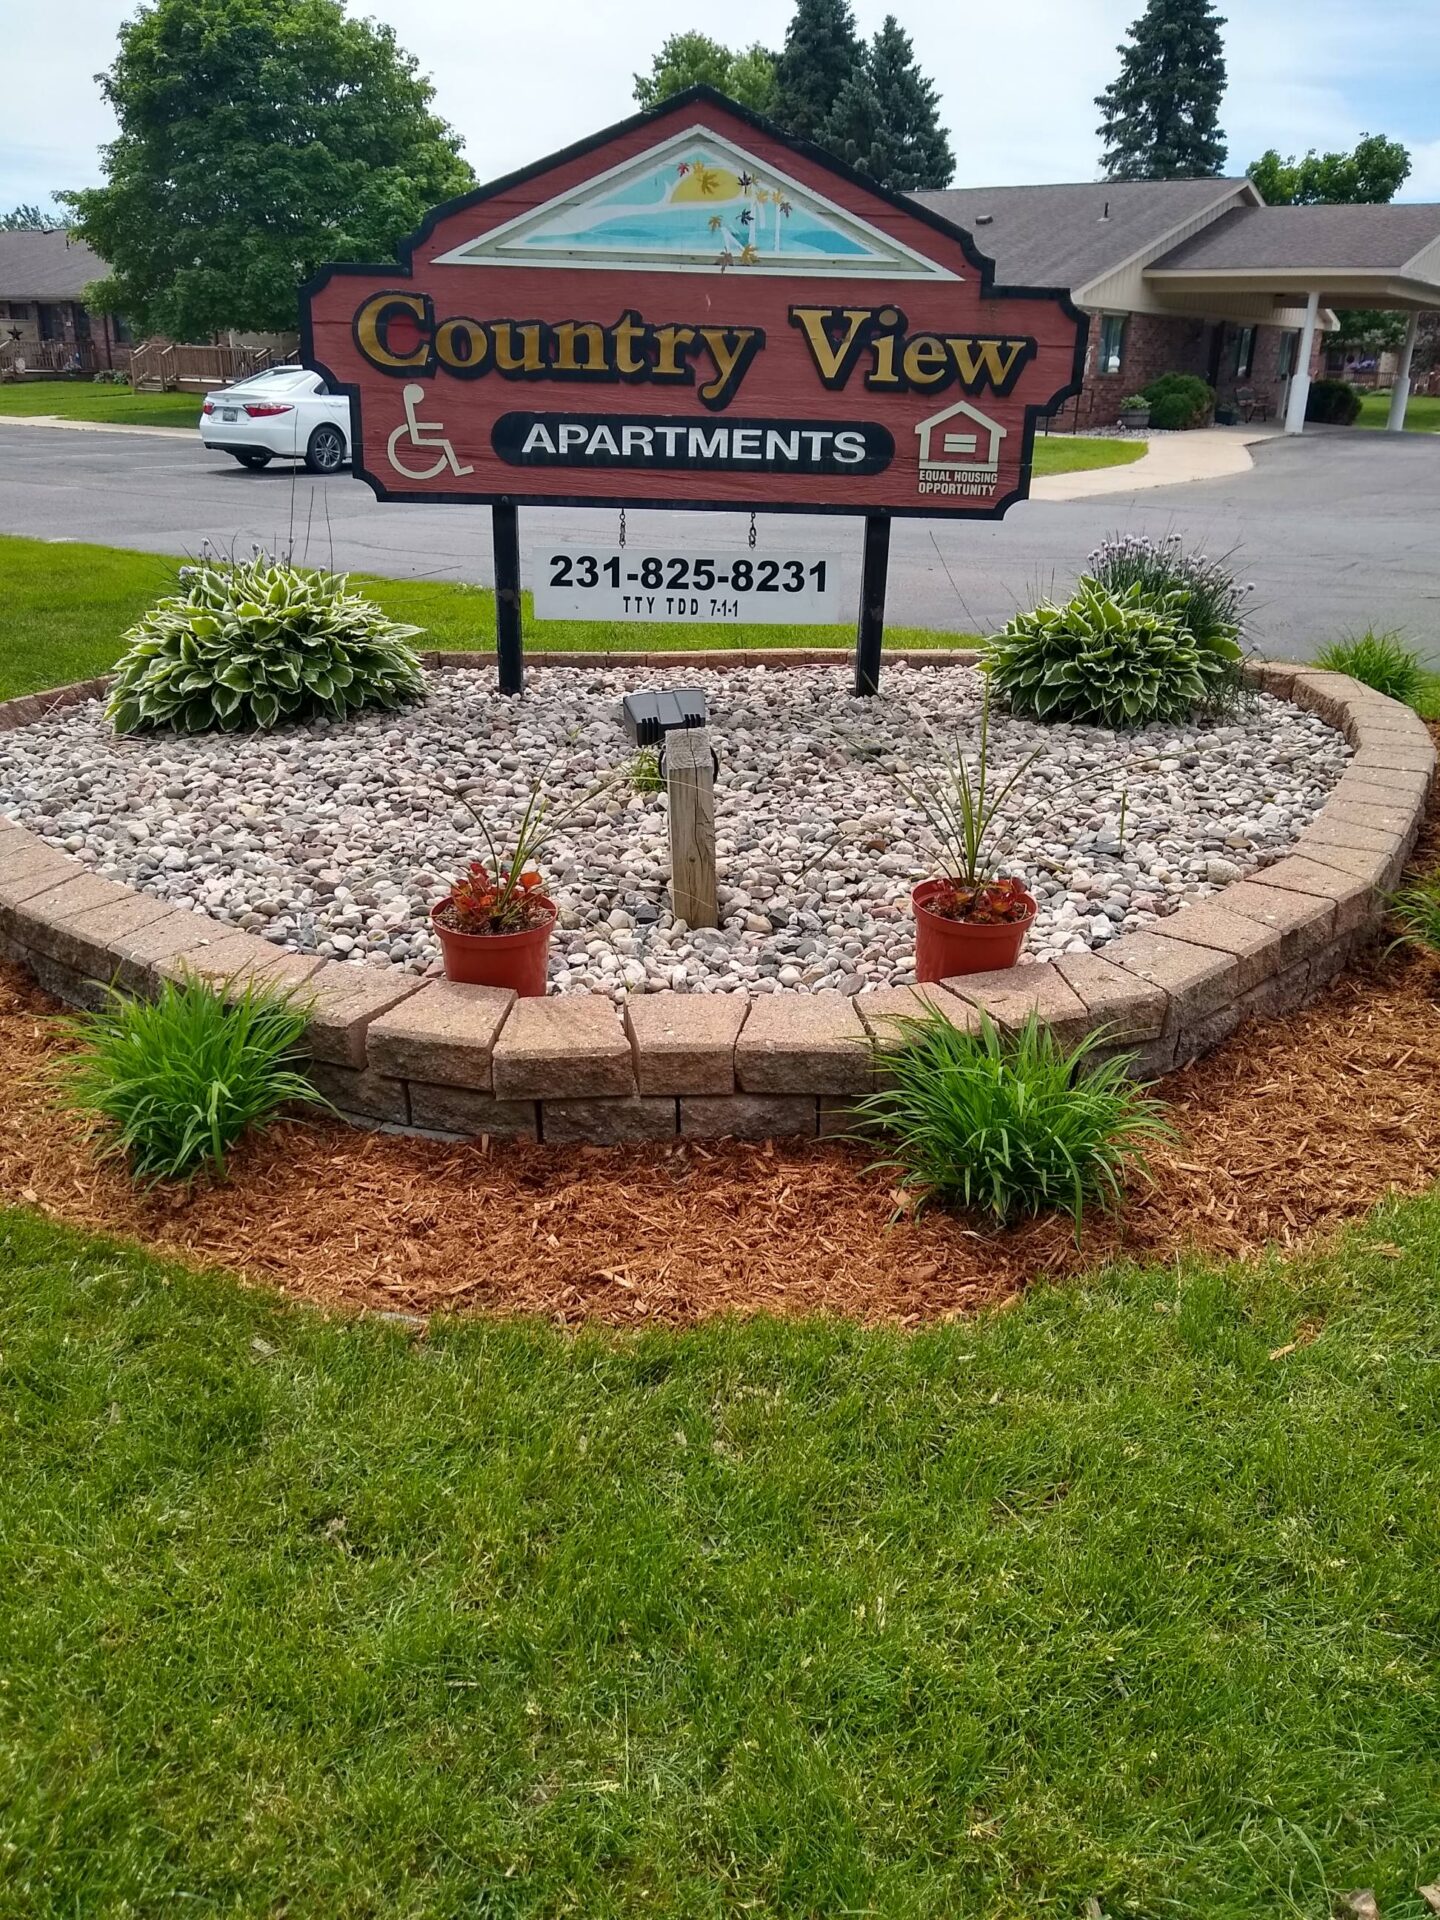 Country View Apartments